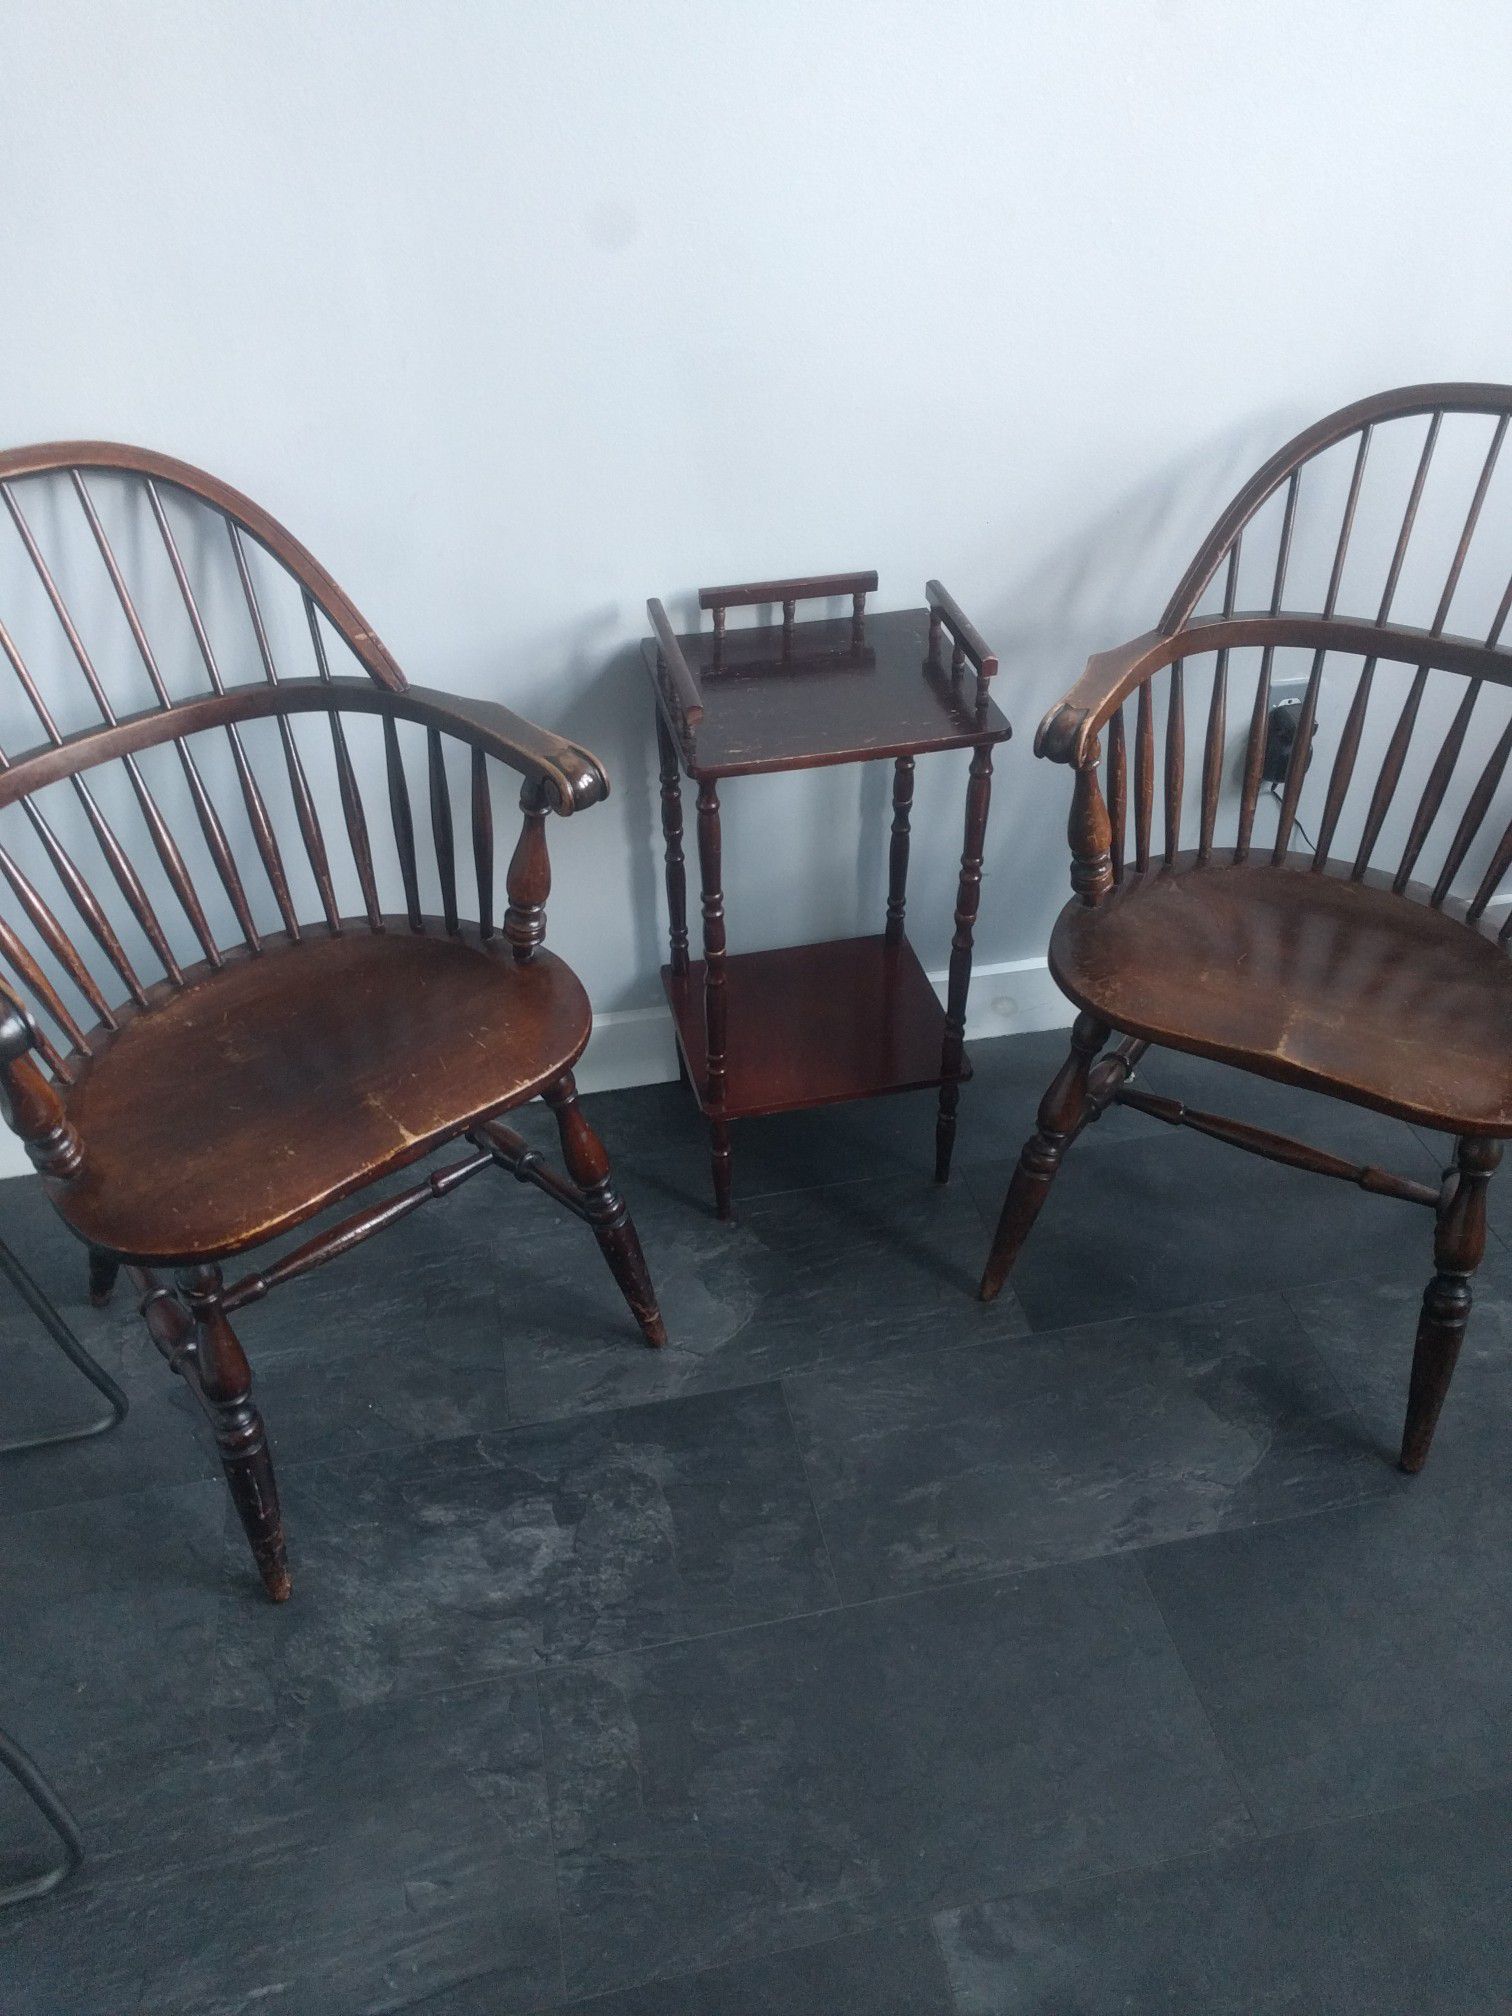 Wood chairs (BL marble chair company)